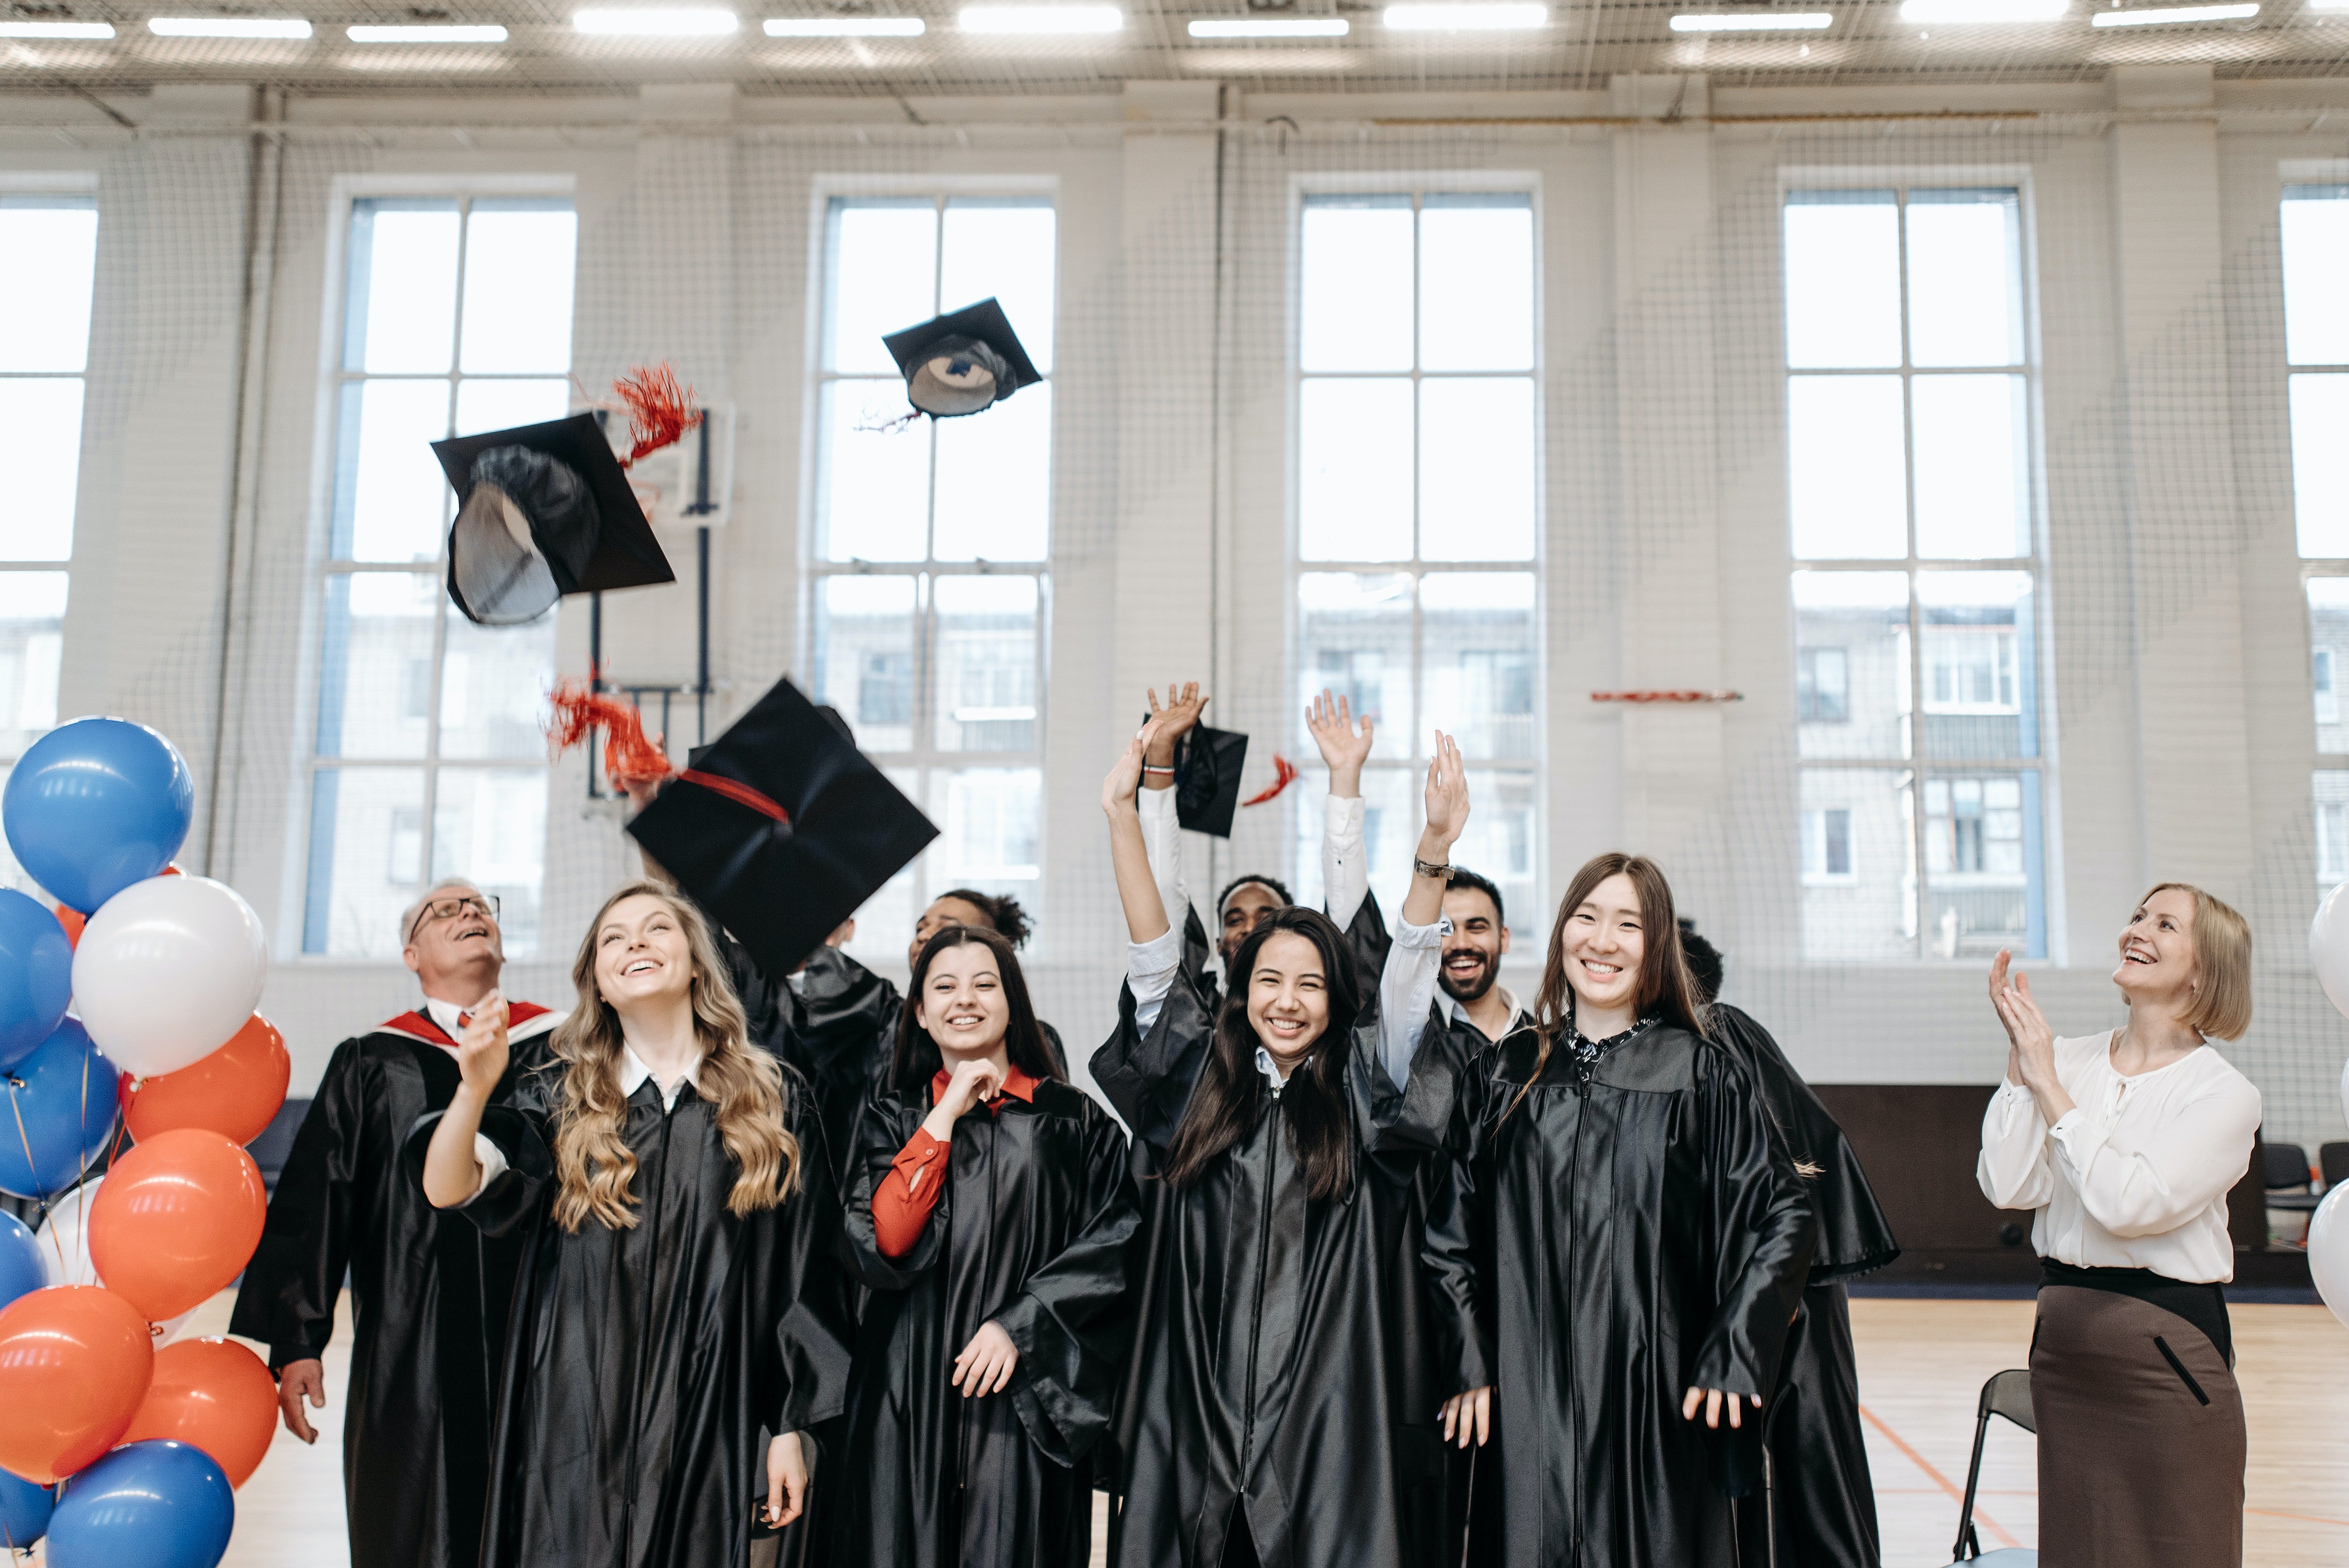 Students after receiving their high school diplomas | Source: Pexels